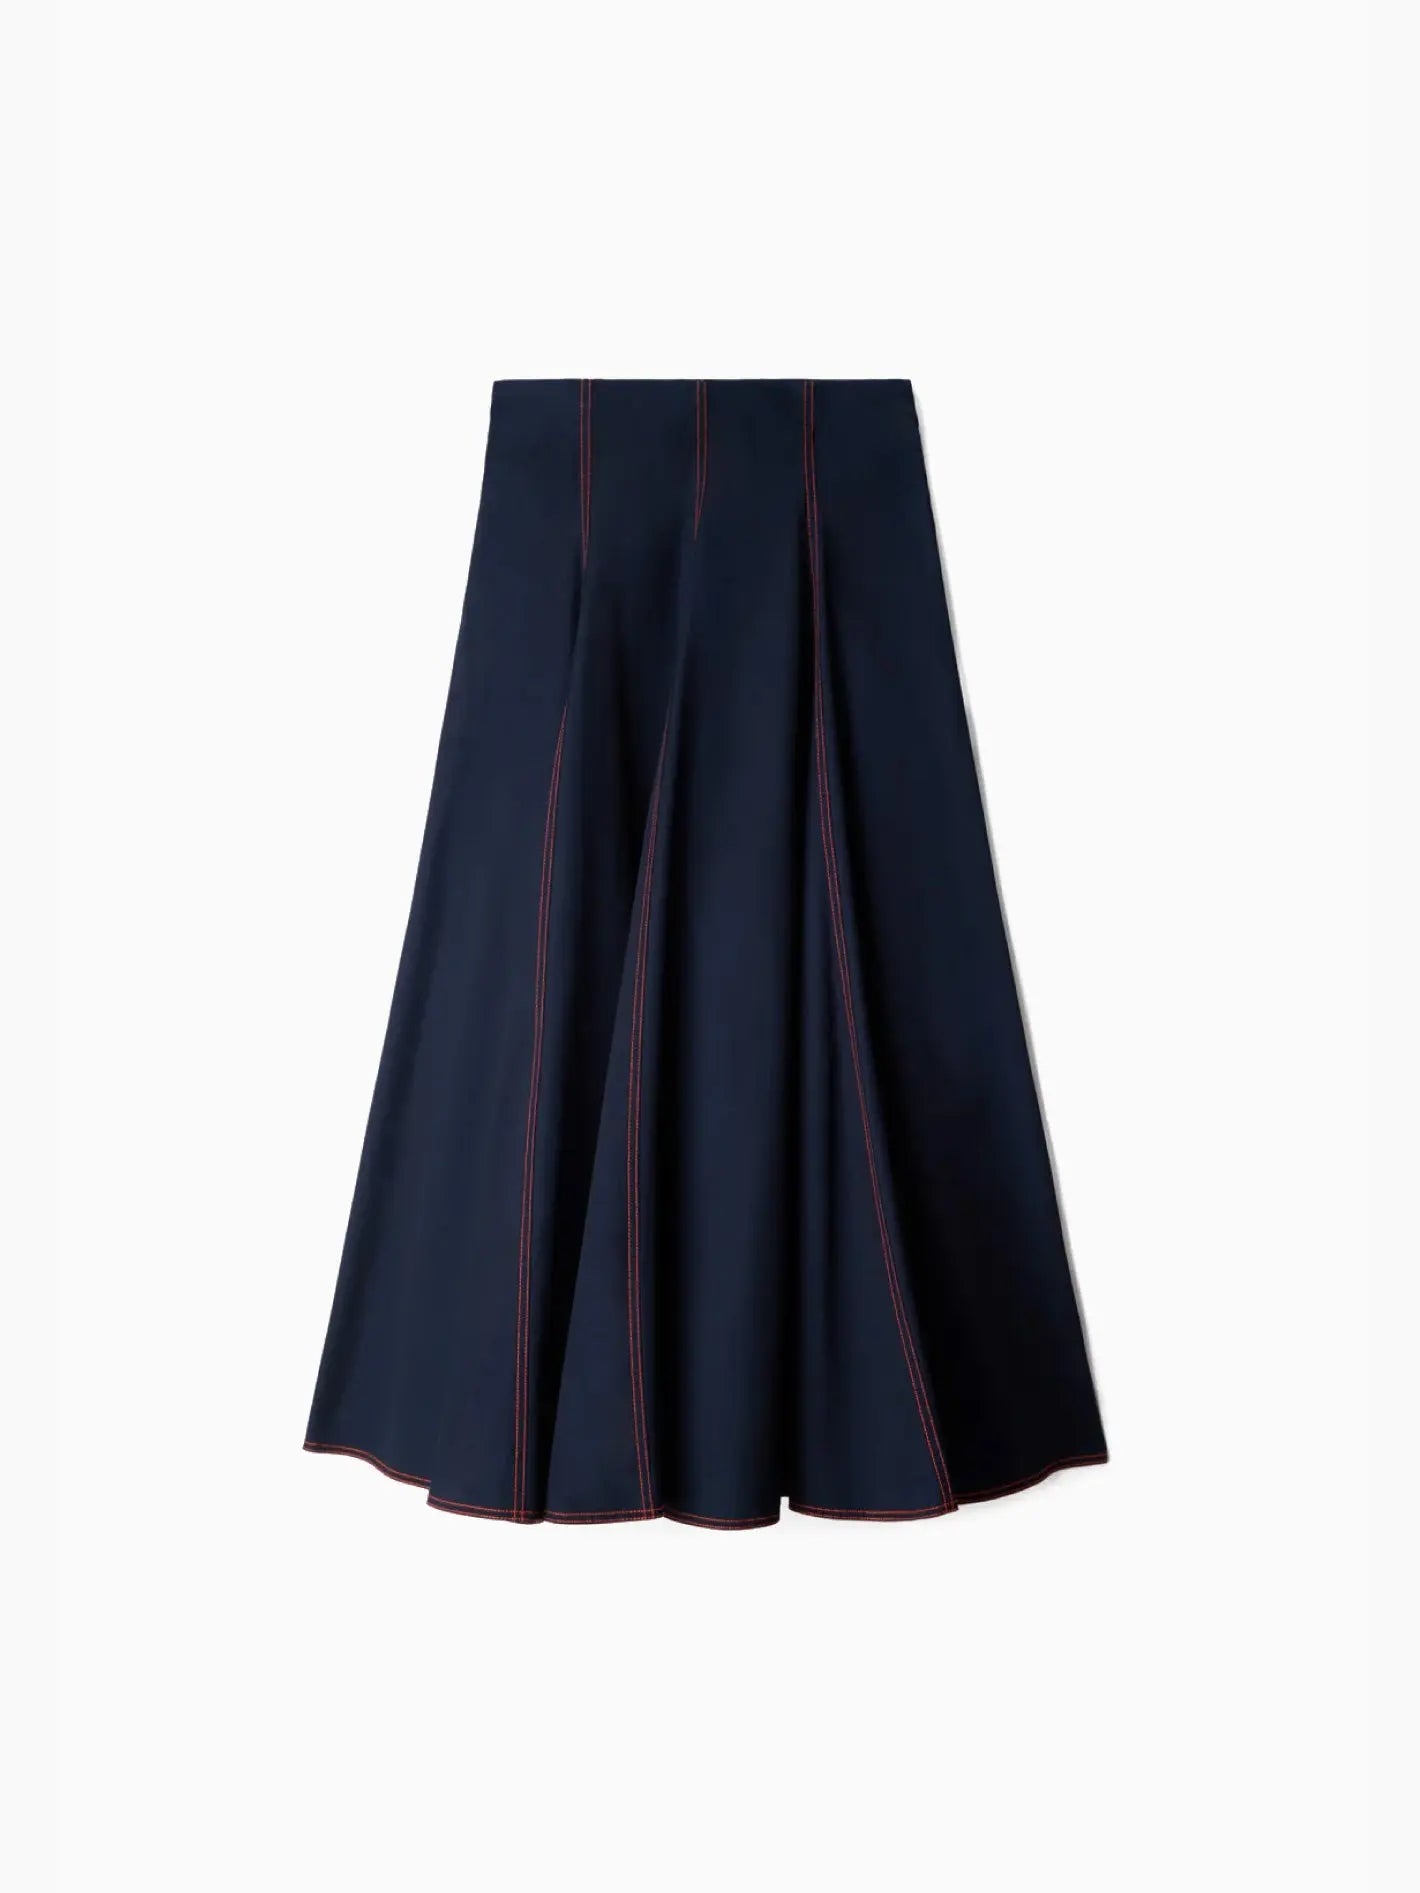 A navy blue Tulipano Skirt Washed Denim with red stitching accents on vertical seams from Sunnei. The skirt flares out slightly with pleats, offering a classic and elegant design. The background is plain white, highlighting the skirt’s details.